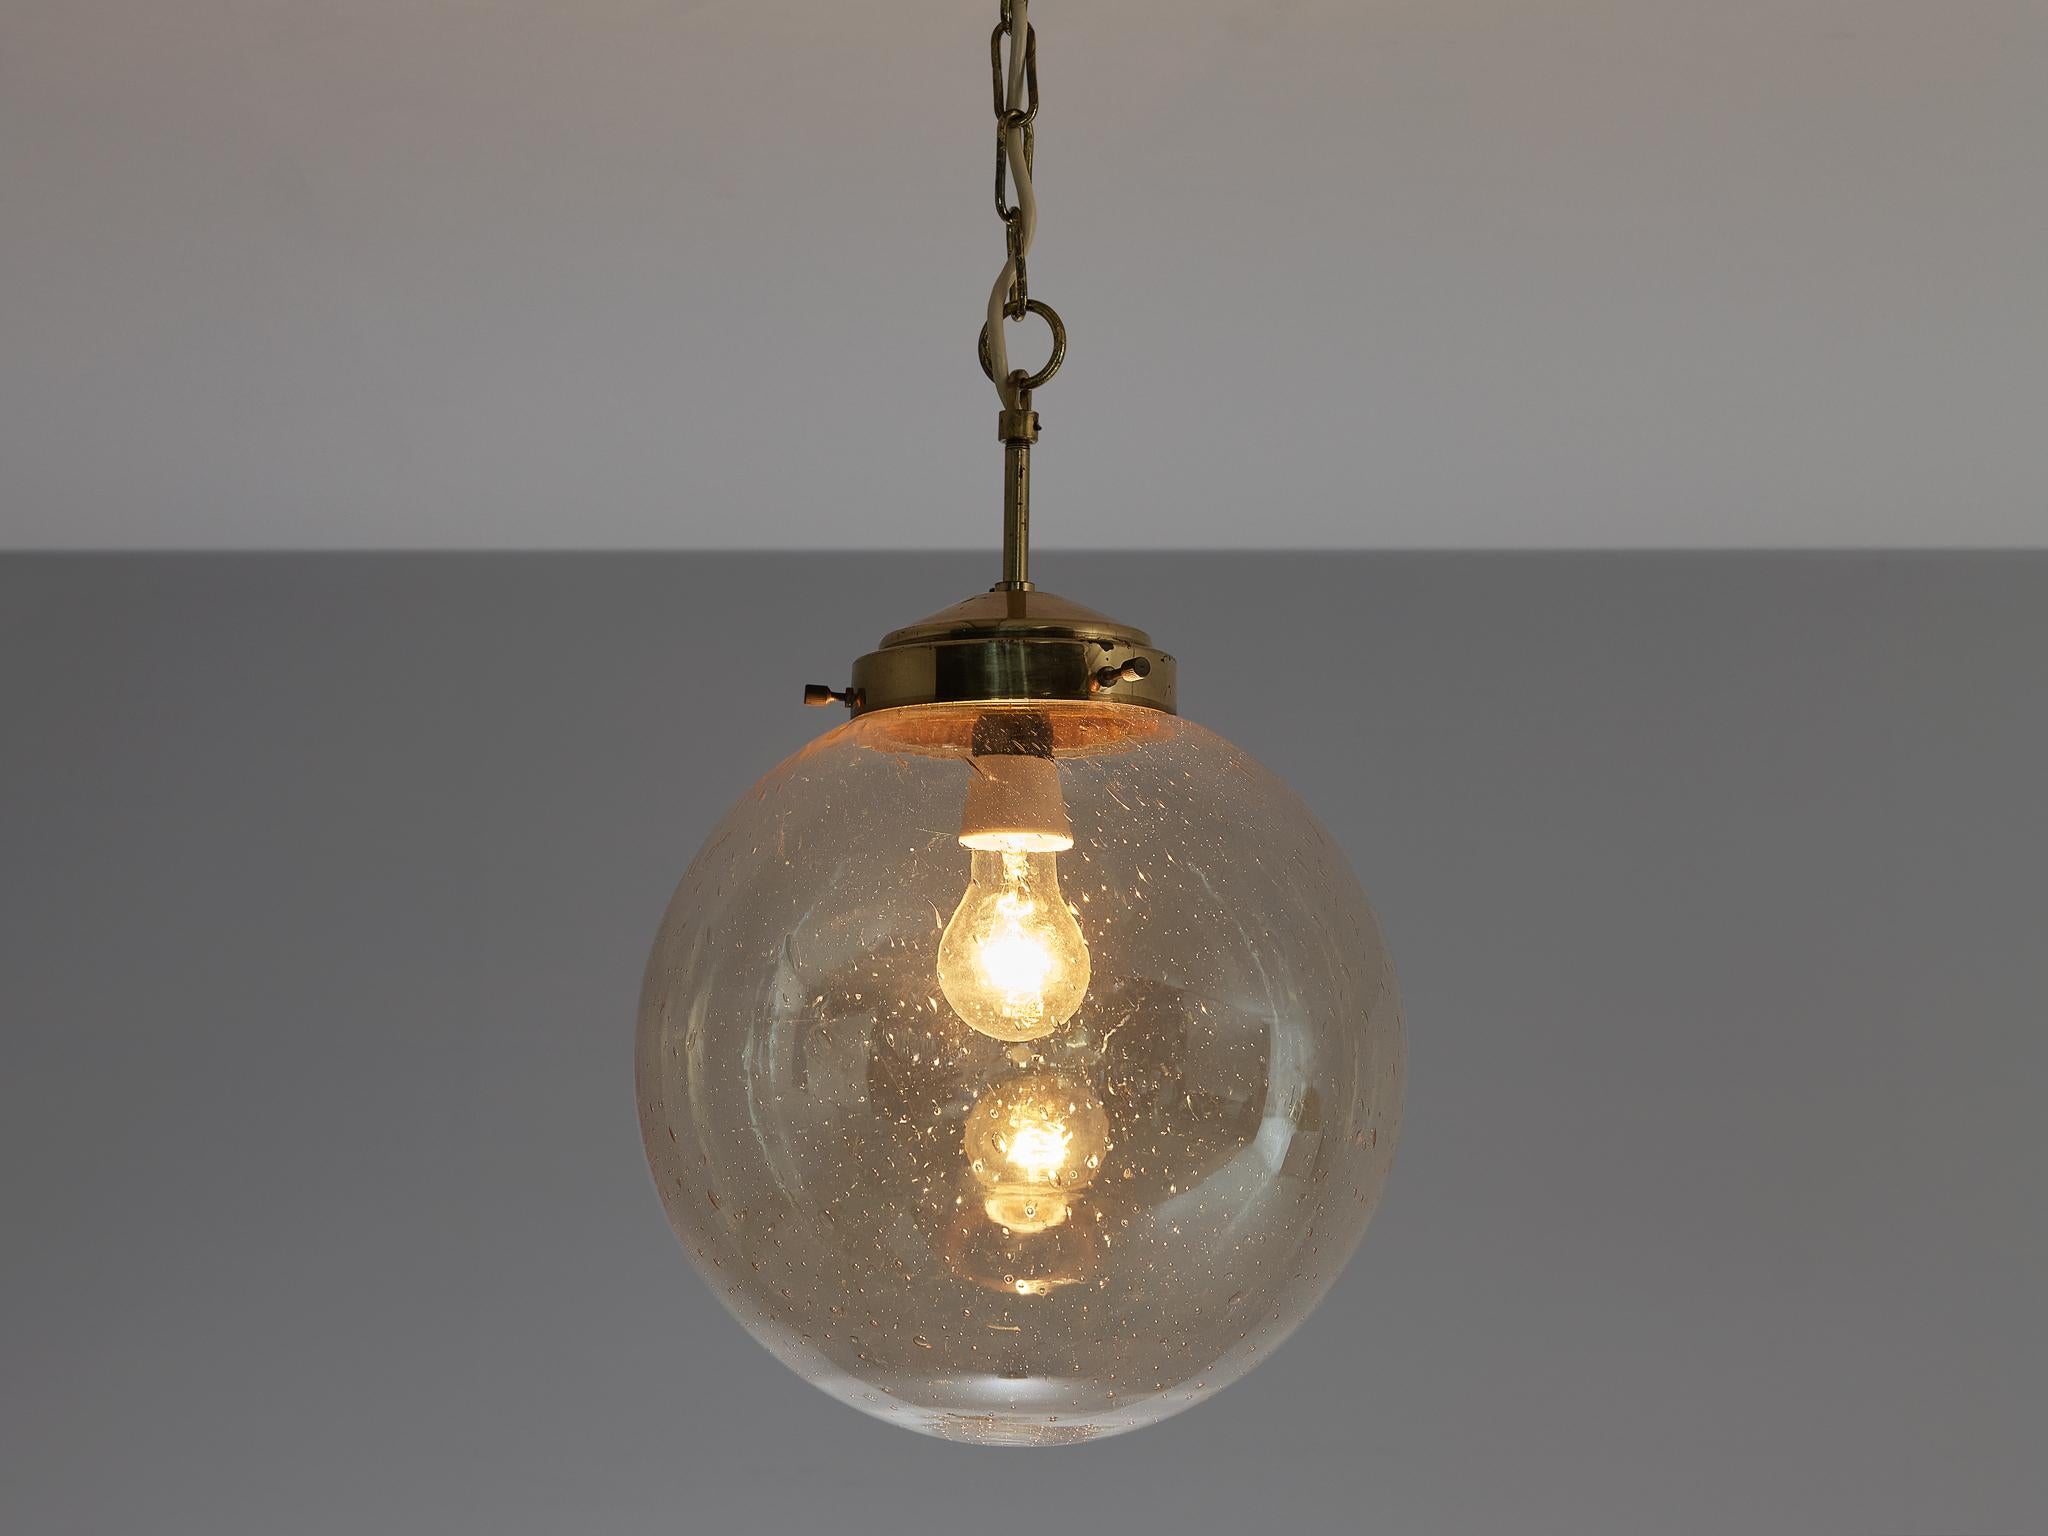 Pendant, brass, glass, Europe, 1970s

Blown glass pendant with multiple bubbles visible in the smoked glass orb. It not only gives the shade a playful appearance, it also creates a sparkling light partition. The canopy, stern and fixture are